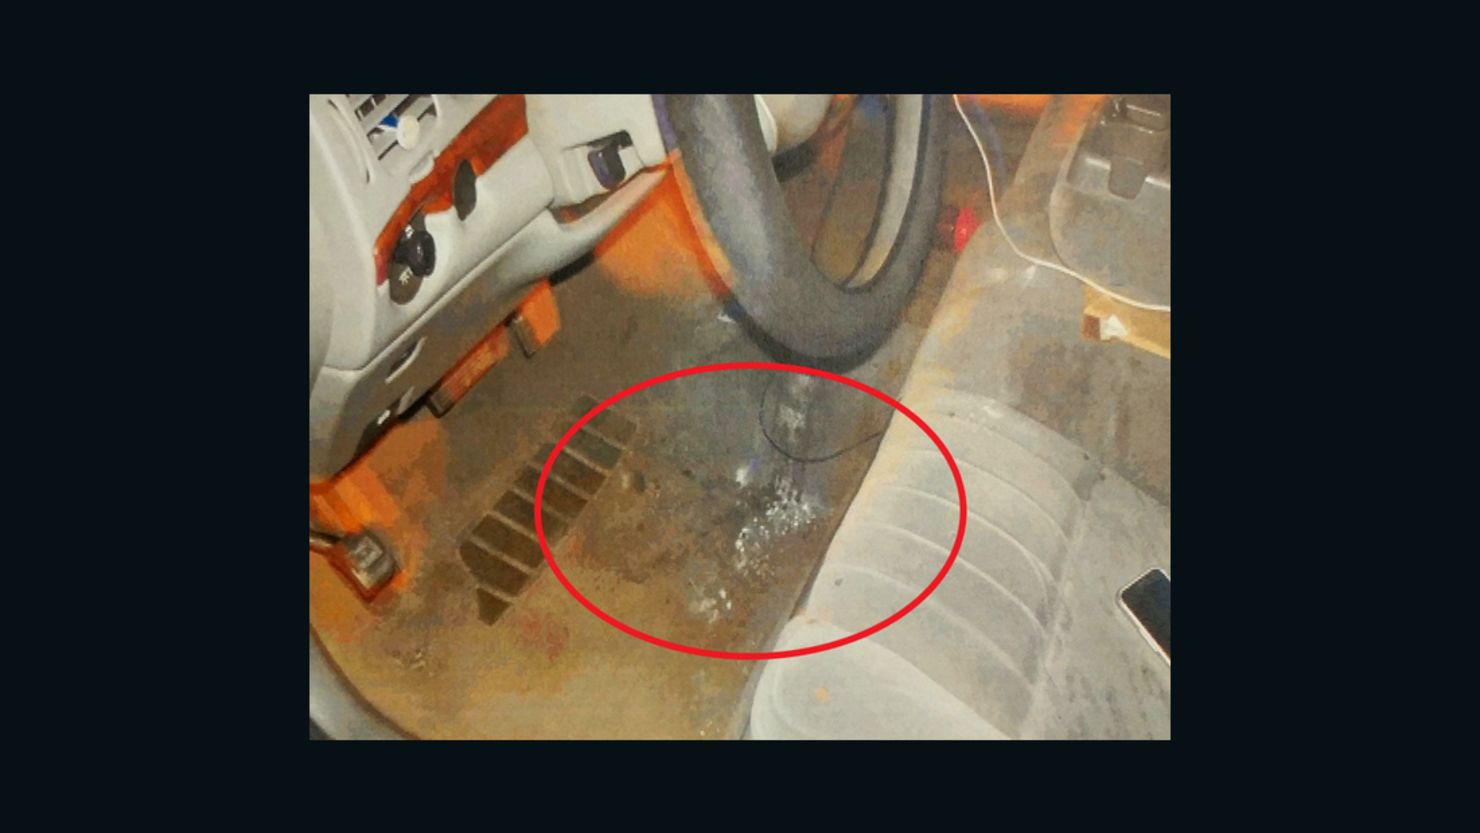 This police photo shows powdered fentanyl on the floor of a car seized during the Ohio arrest.